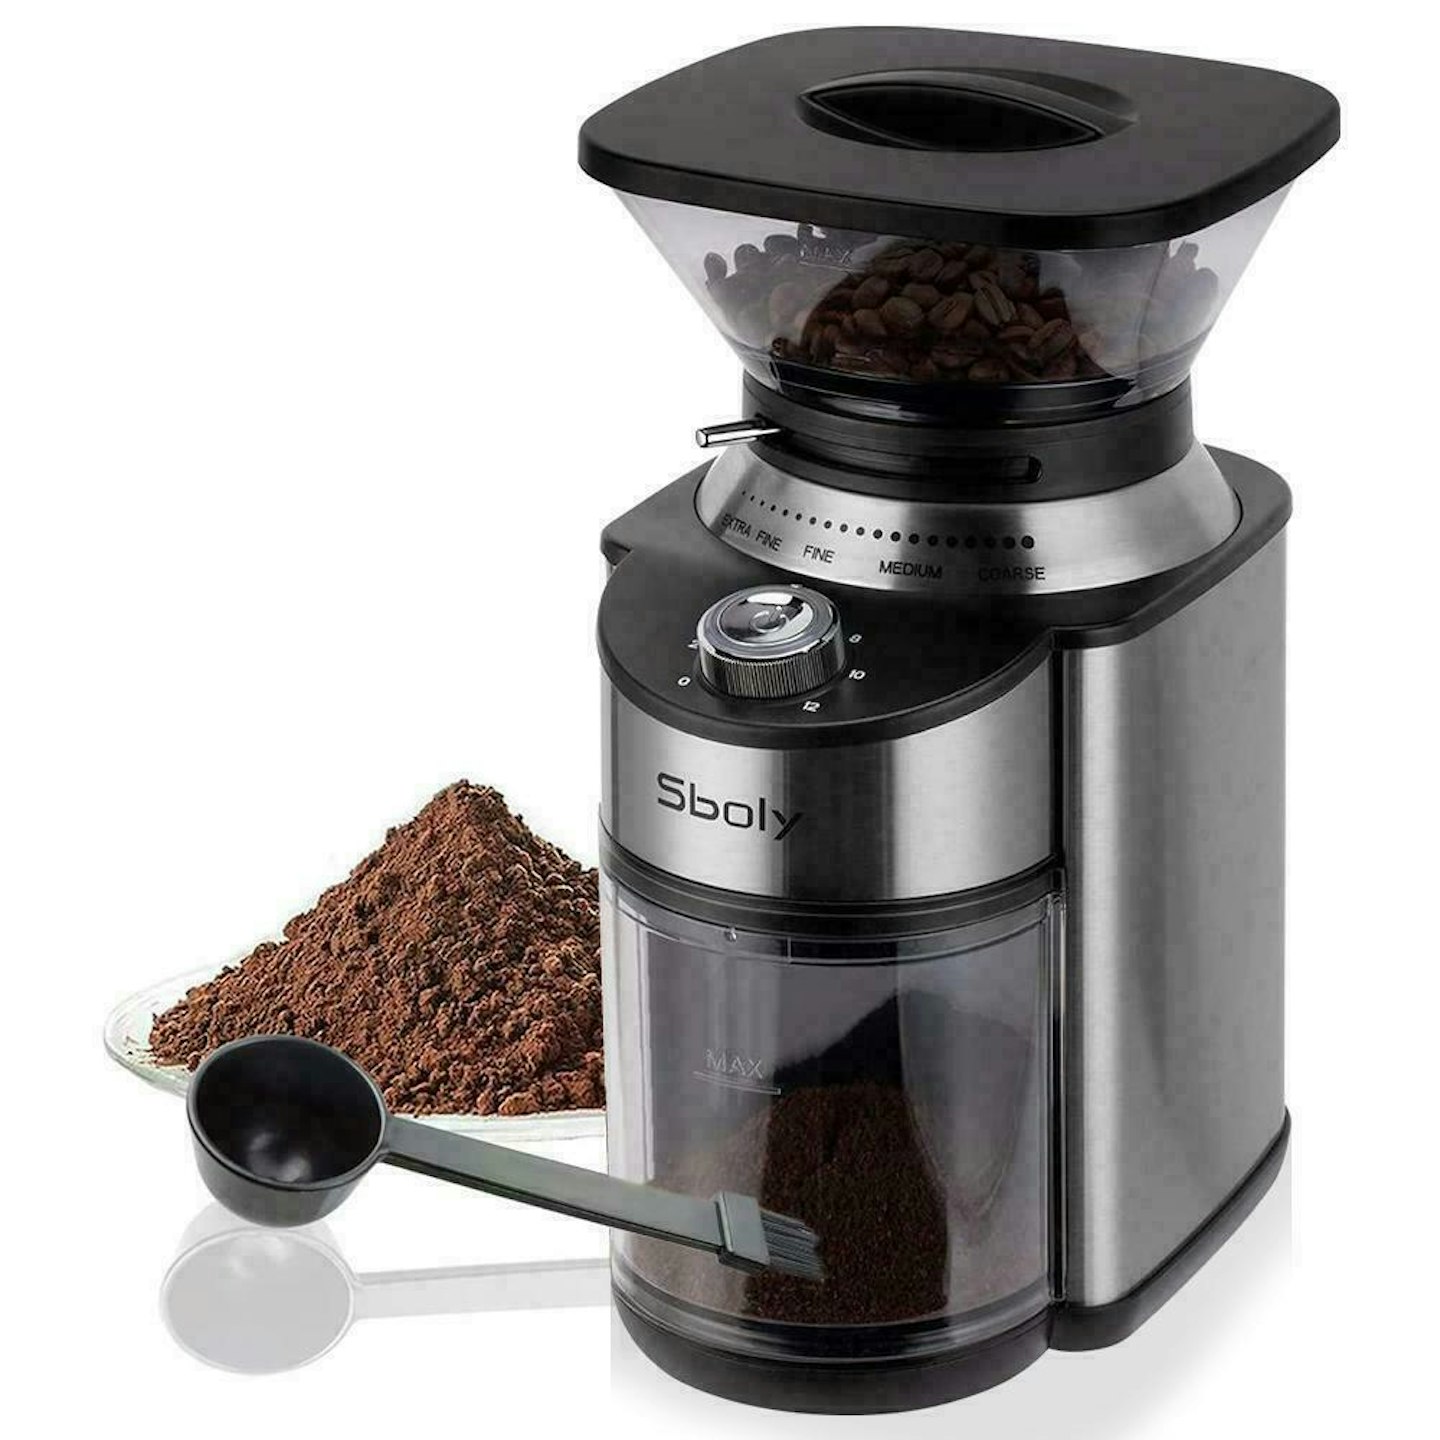 Sboly Conical Burr Coffee Grinder Stainless Steel 19 Settings 2-12 Cups